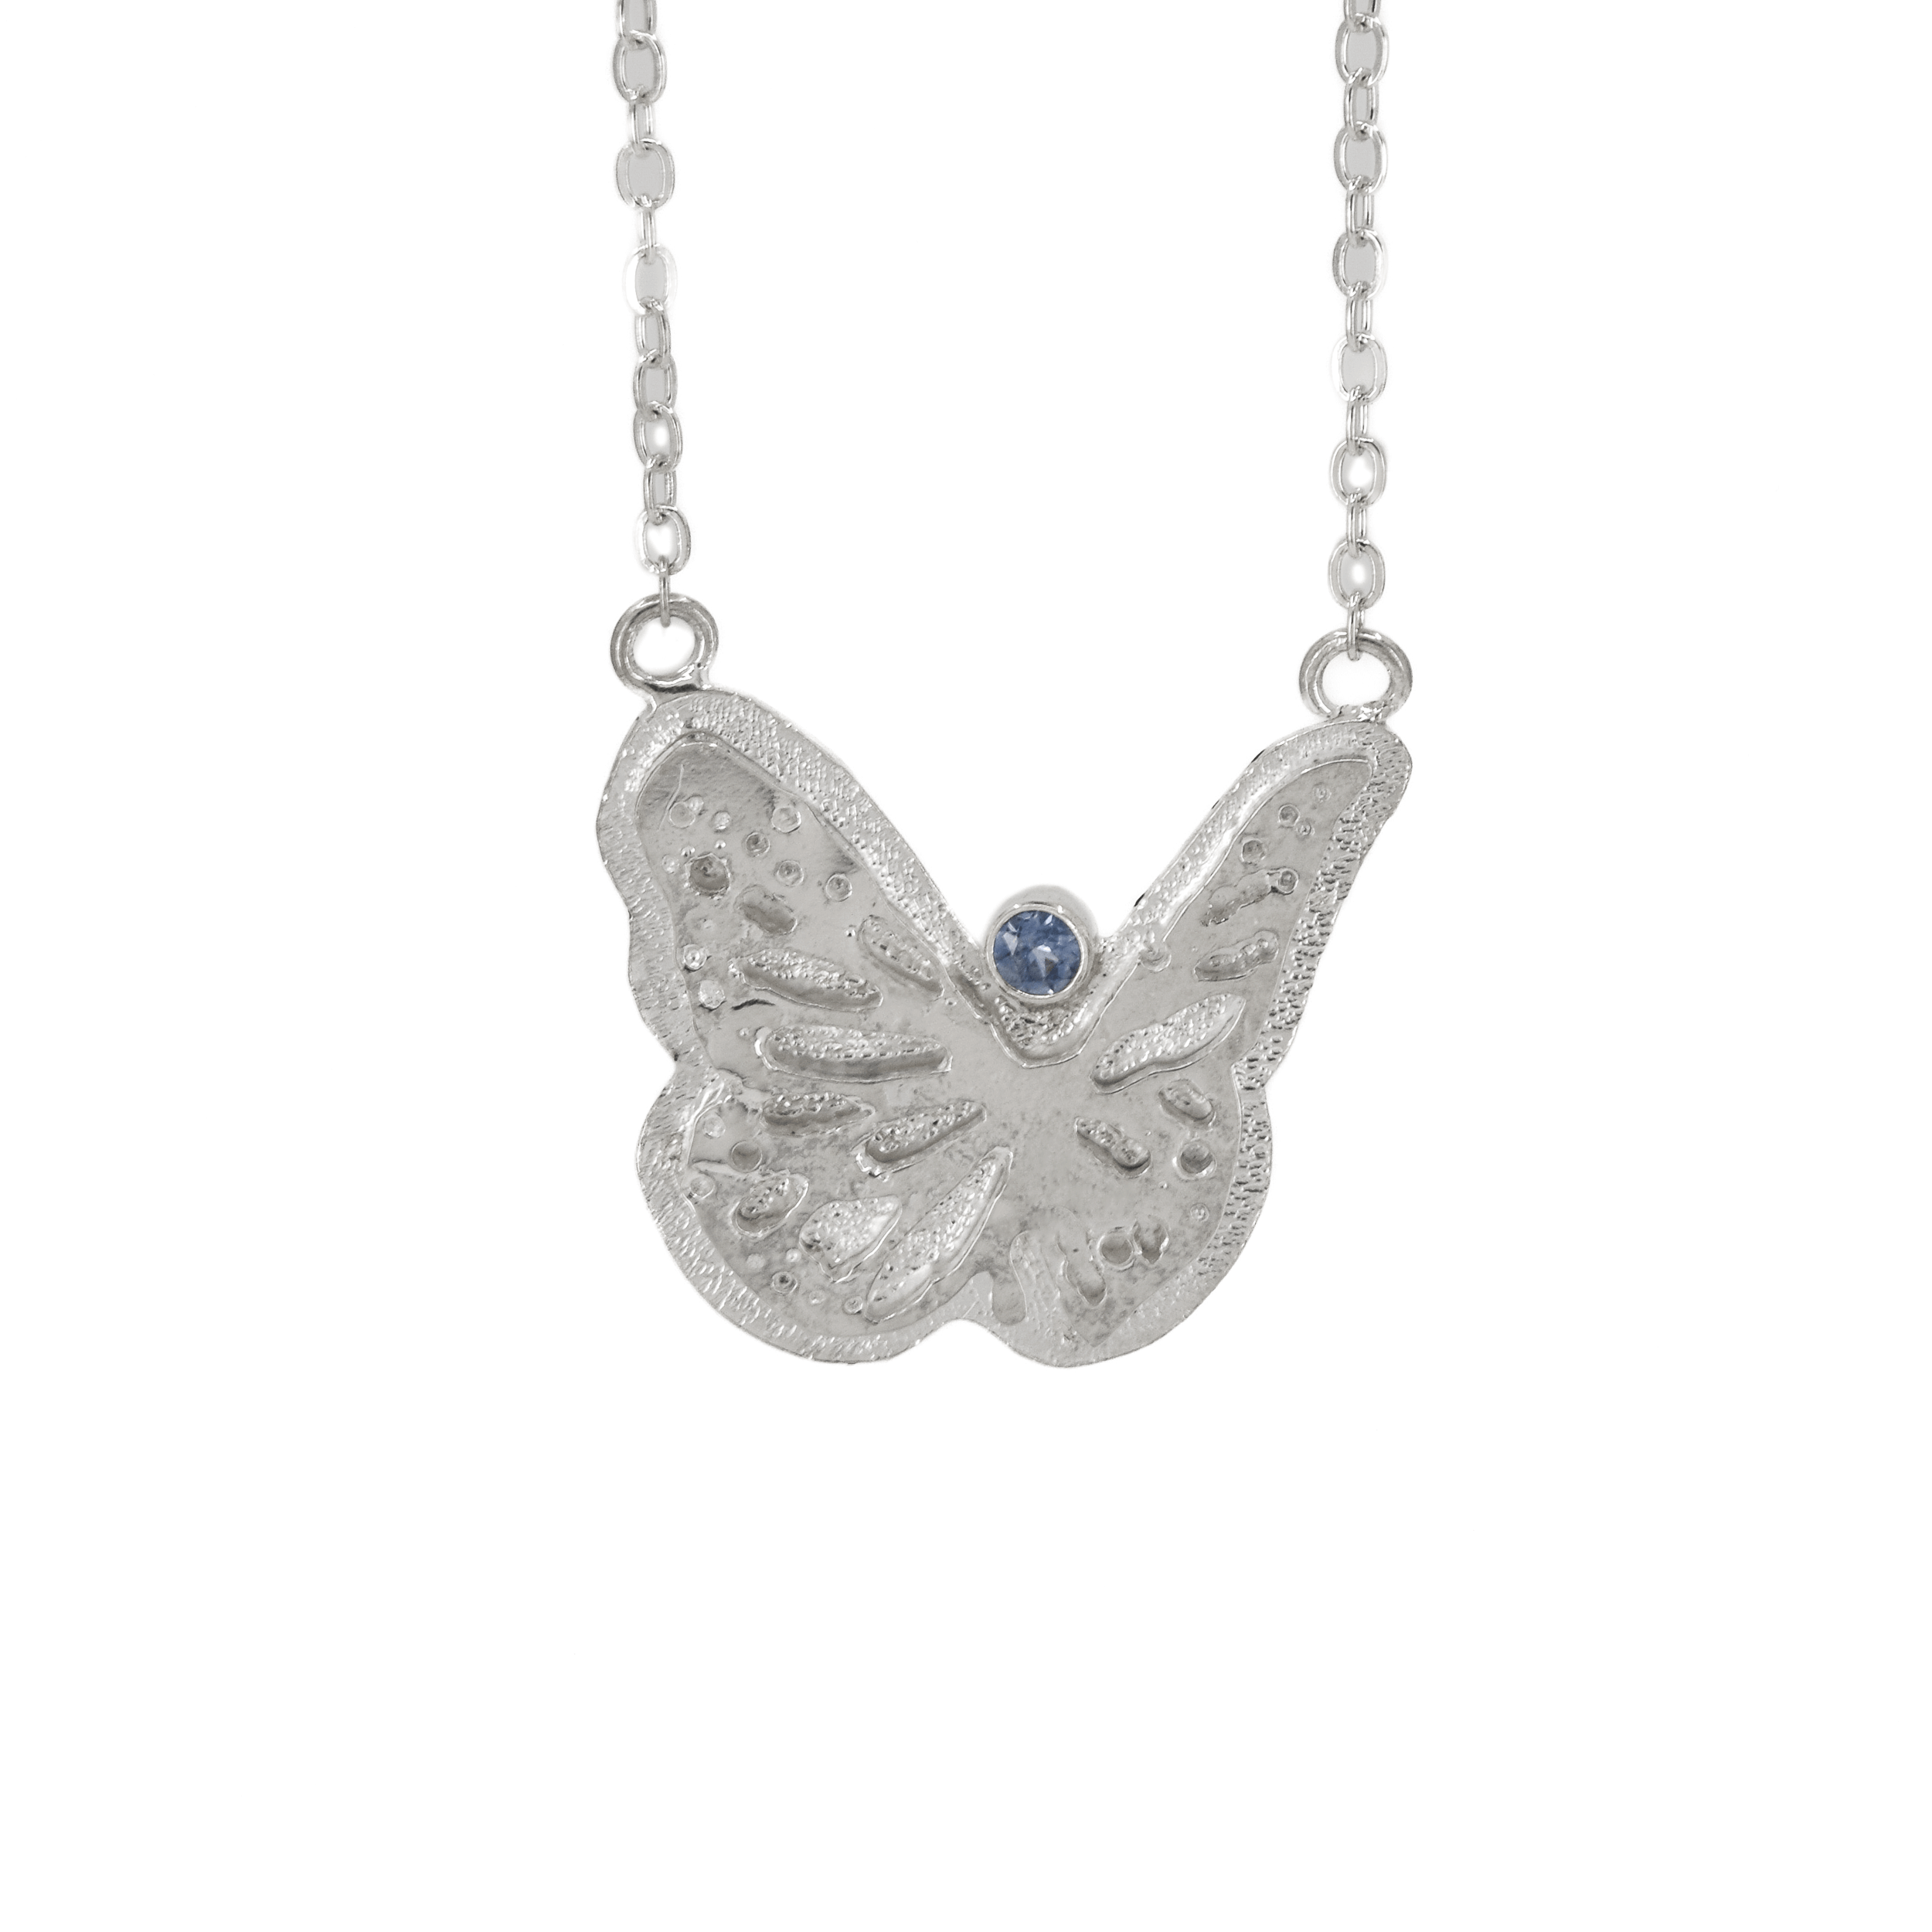 Large textured butterfly necklace in sterling silver with a faceted Teal Montana Sapphire round stone